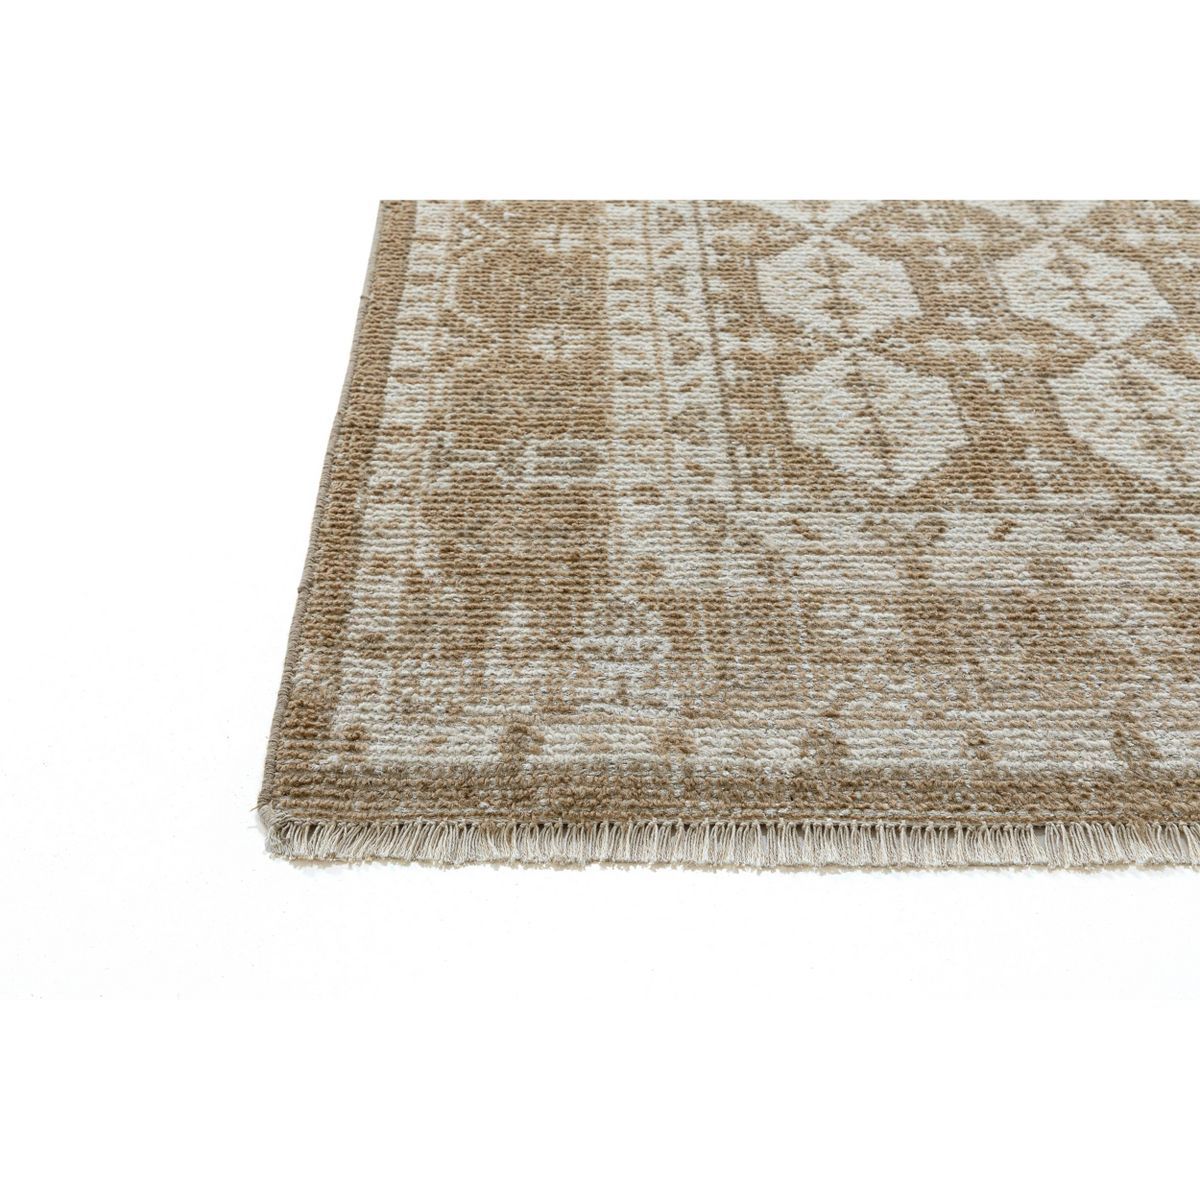 7'x10' Hand Knotted Persian Style Tile Rug Beige - Threshold™ designed with Studio McGee | Target